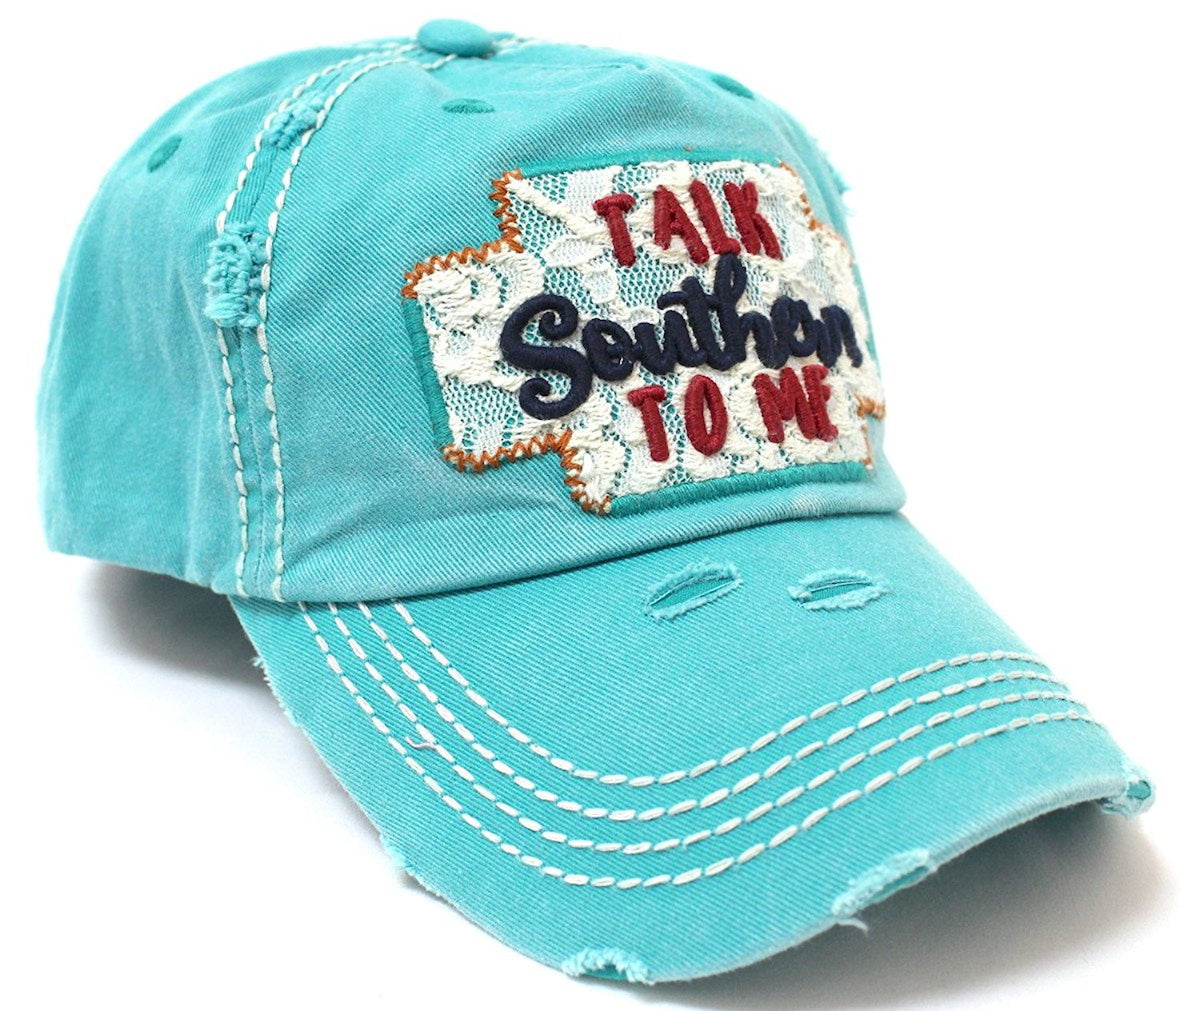 CAPS 'N VINTAGE Turquoise Distressed Talk Southern To Me Lace Embroidery Baseball Hat - Caps 'N Vintage 